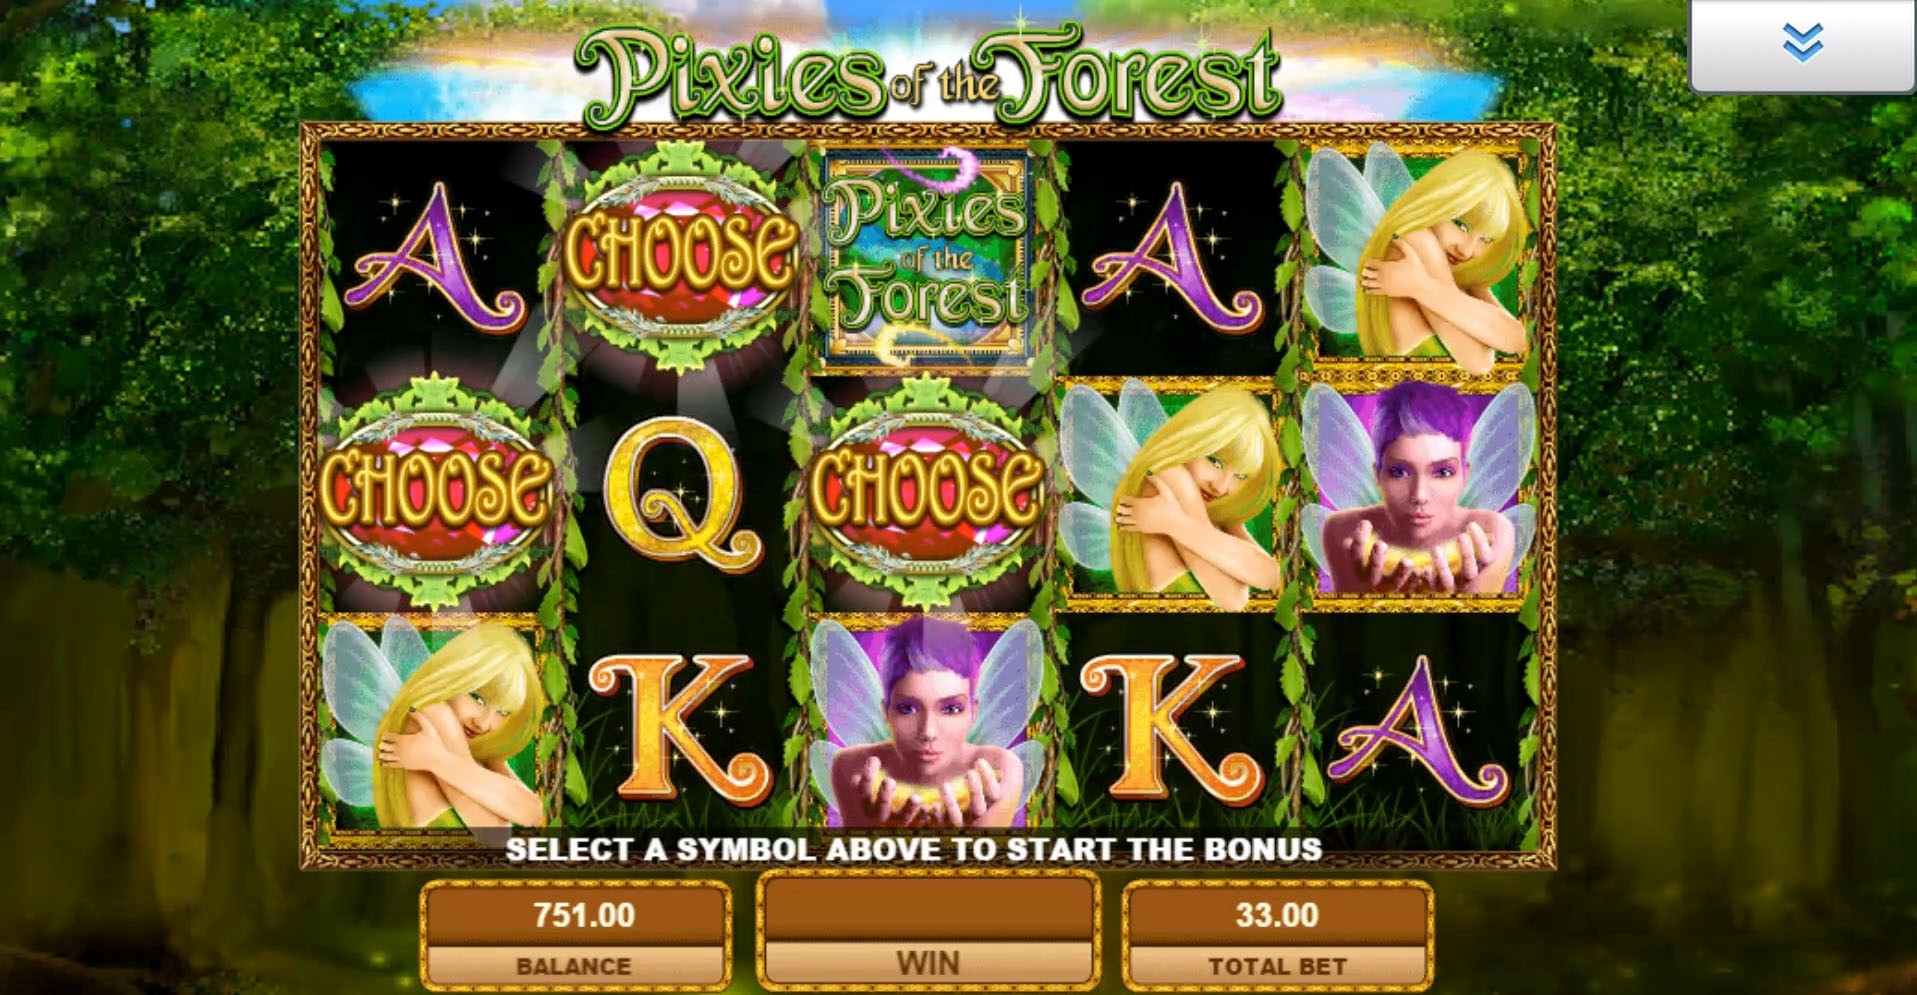 Choose a symbol to reveal the number of Pixies of the Forest slot Free Spins